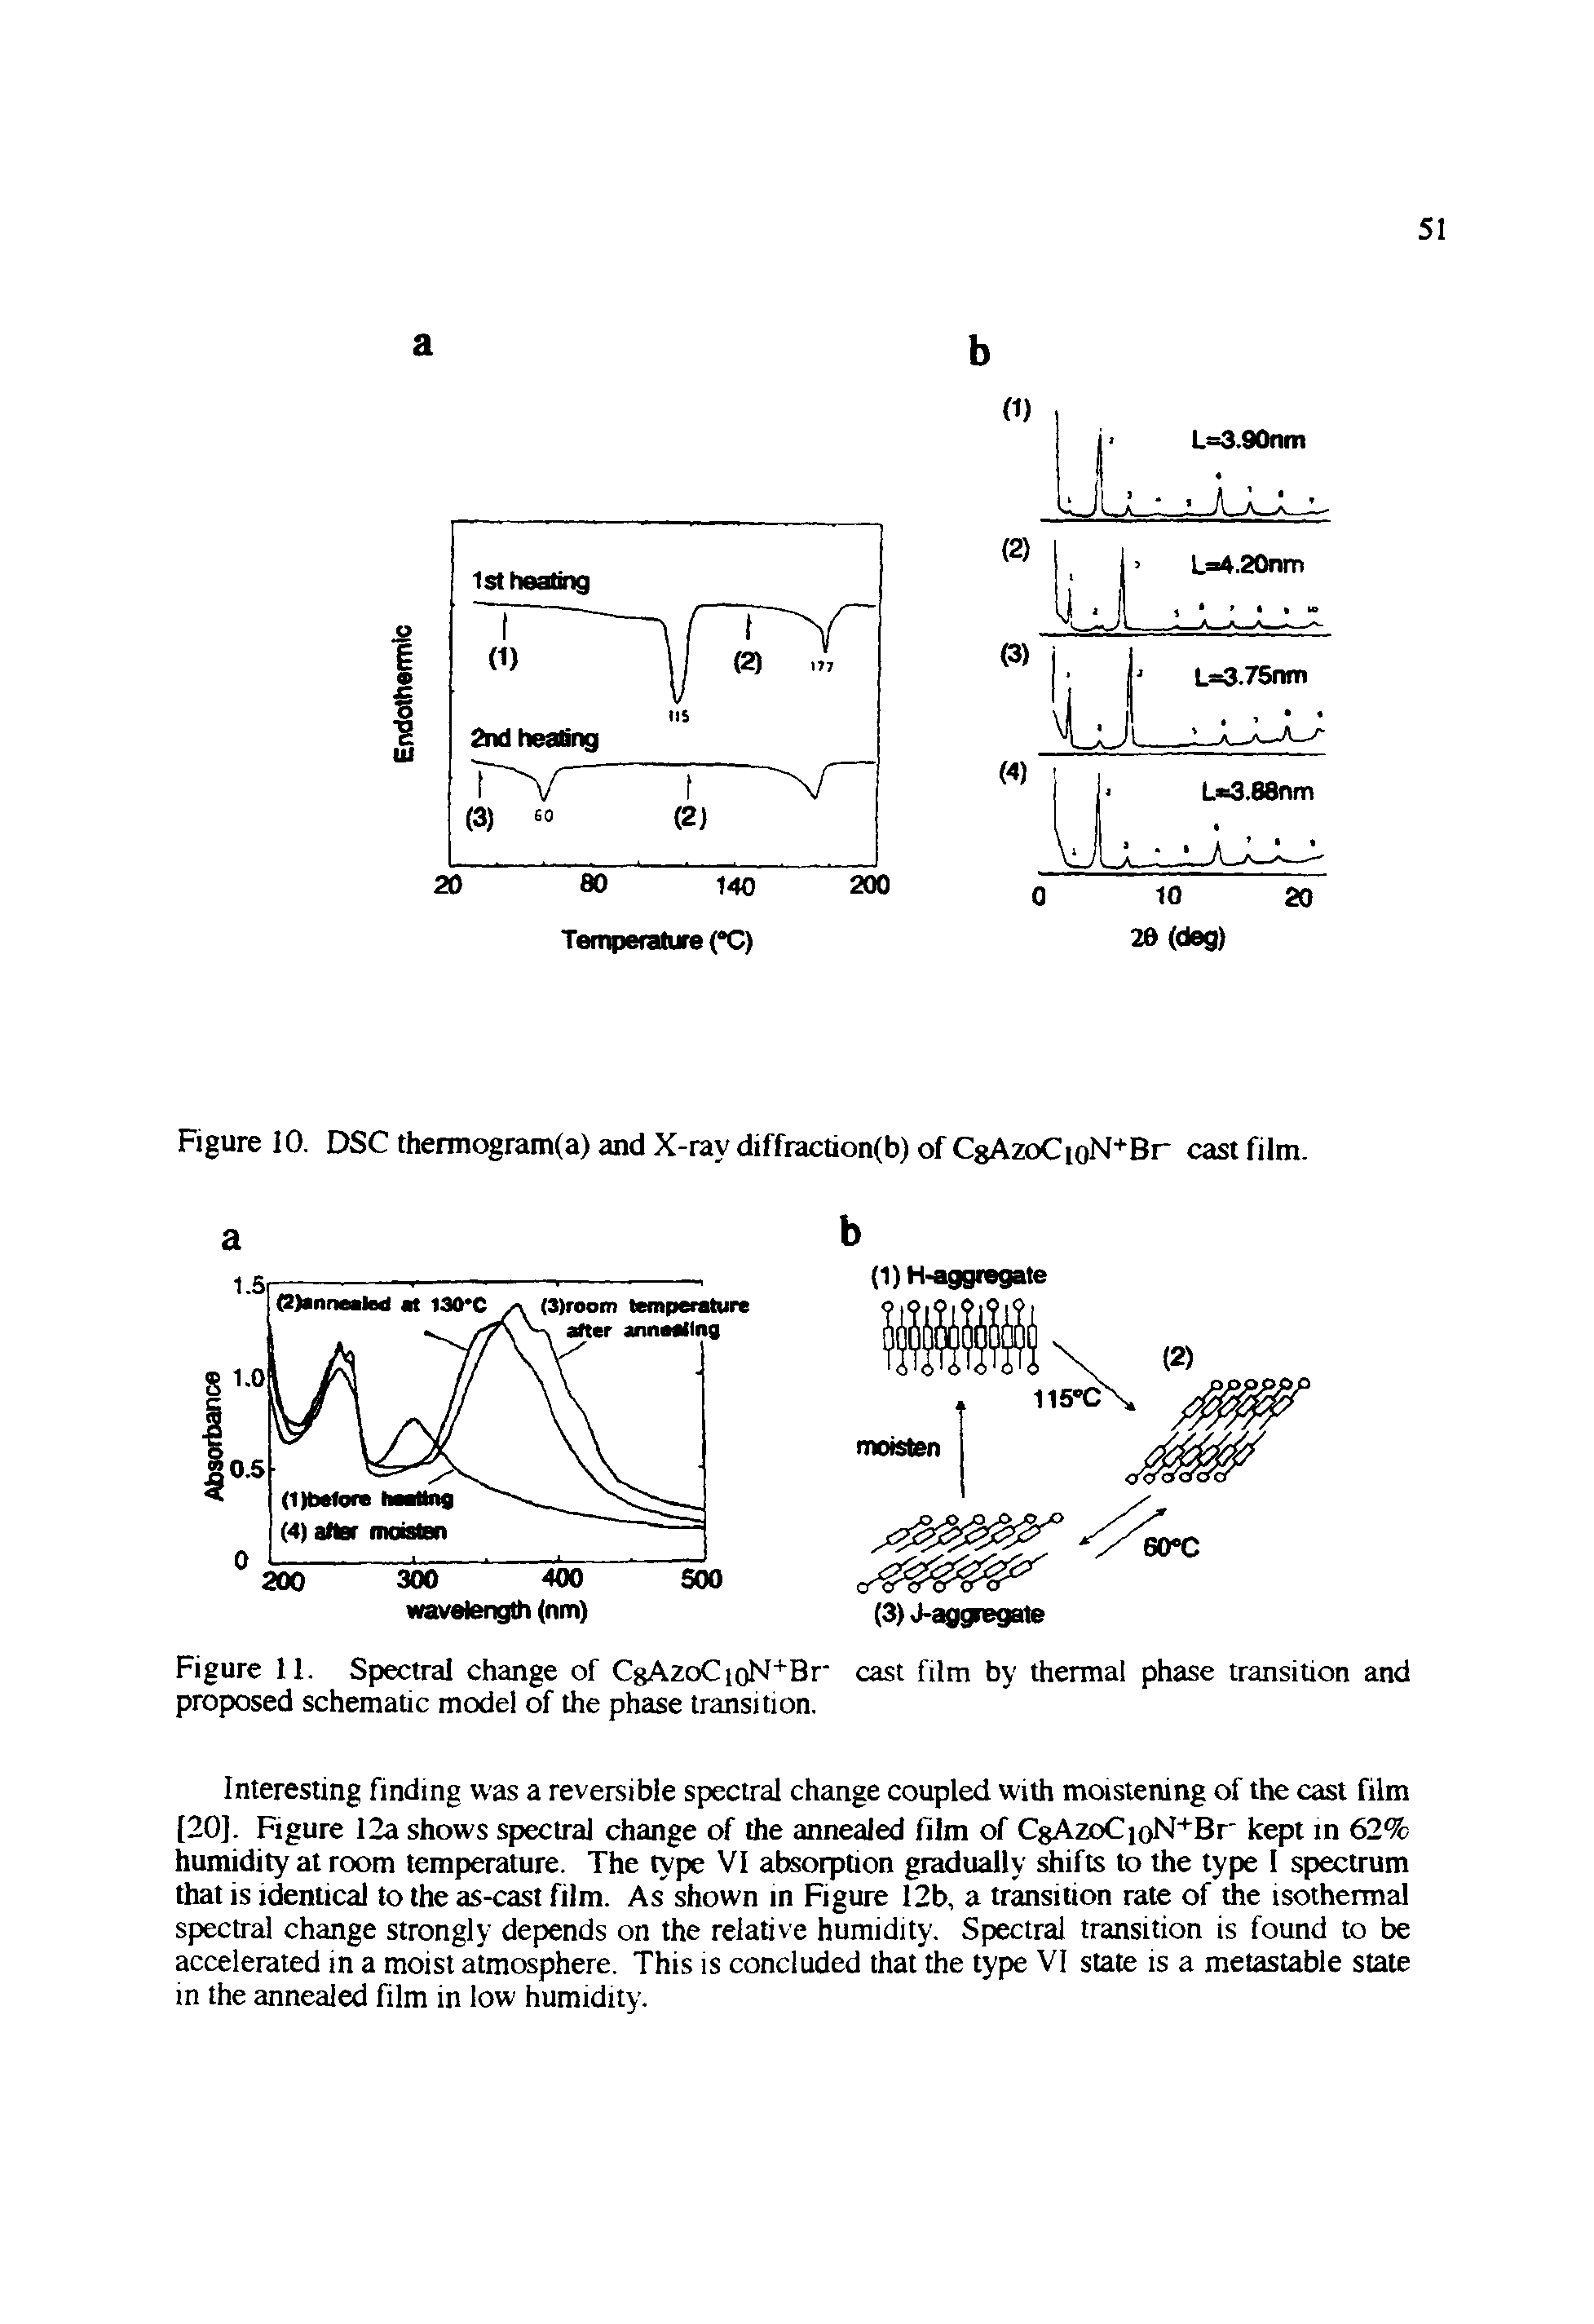 Figure 11. Spectral change of CgAzoCioN+Br cast film by thermal phase transition and proposed schematic model of the phase transition.